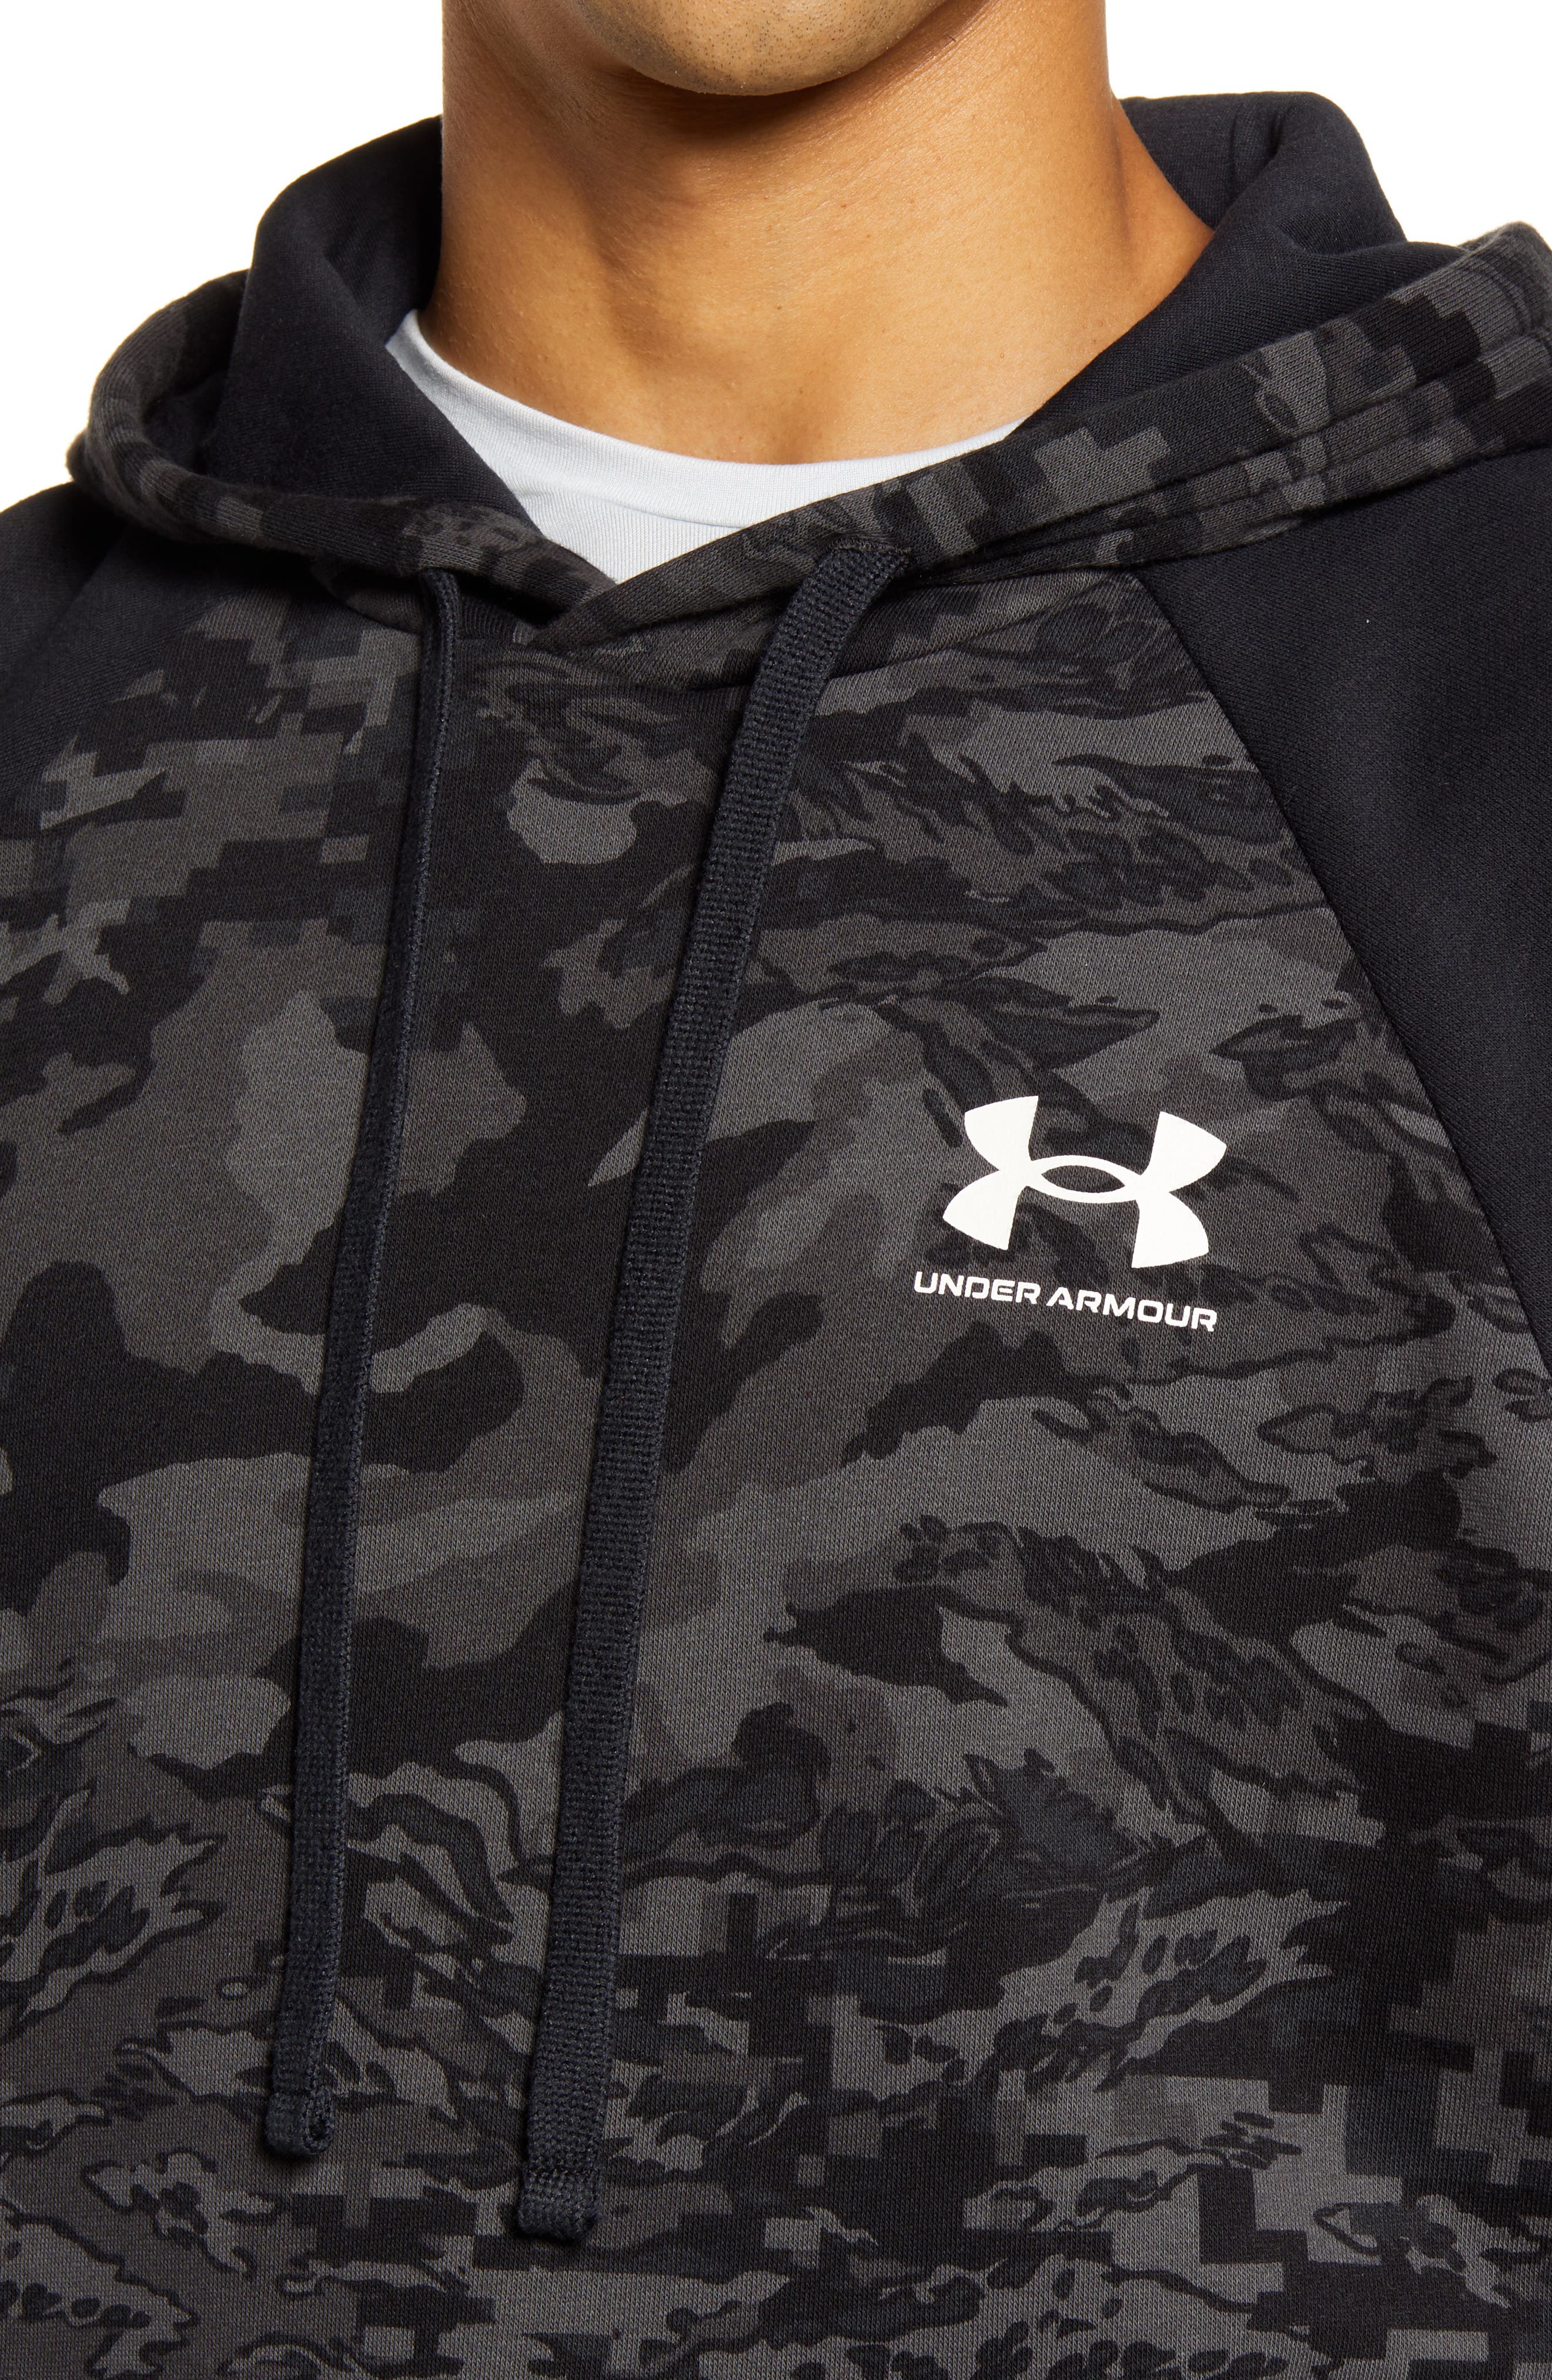 Under Armour Mens Rival Fleece Plus Camo Pull-Over Hoodie 